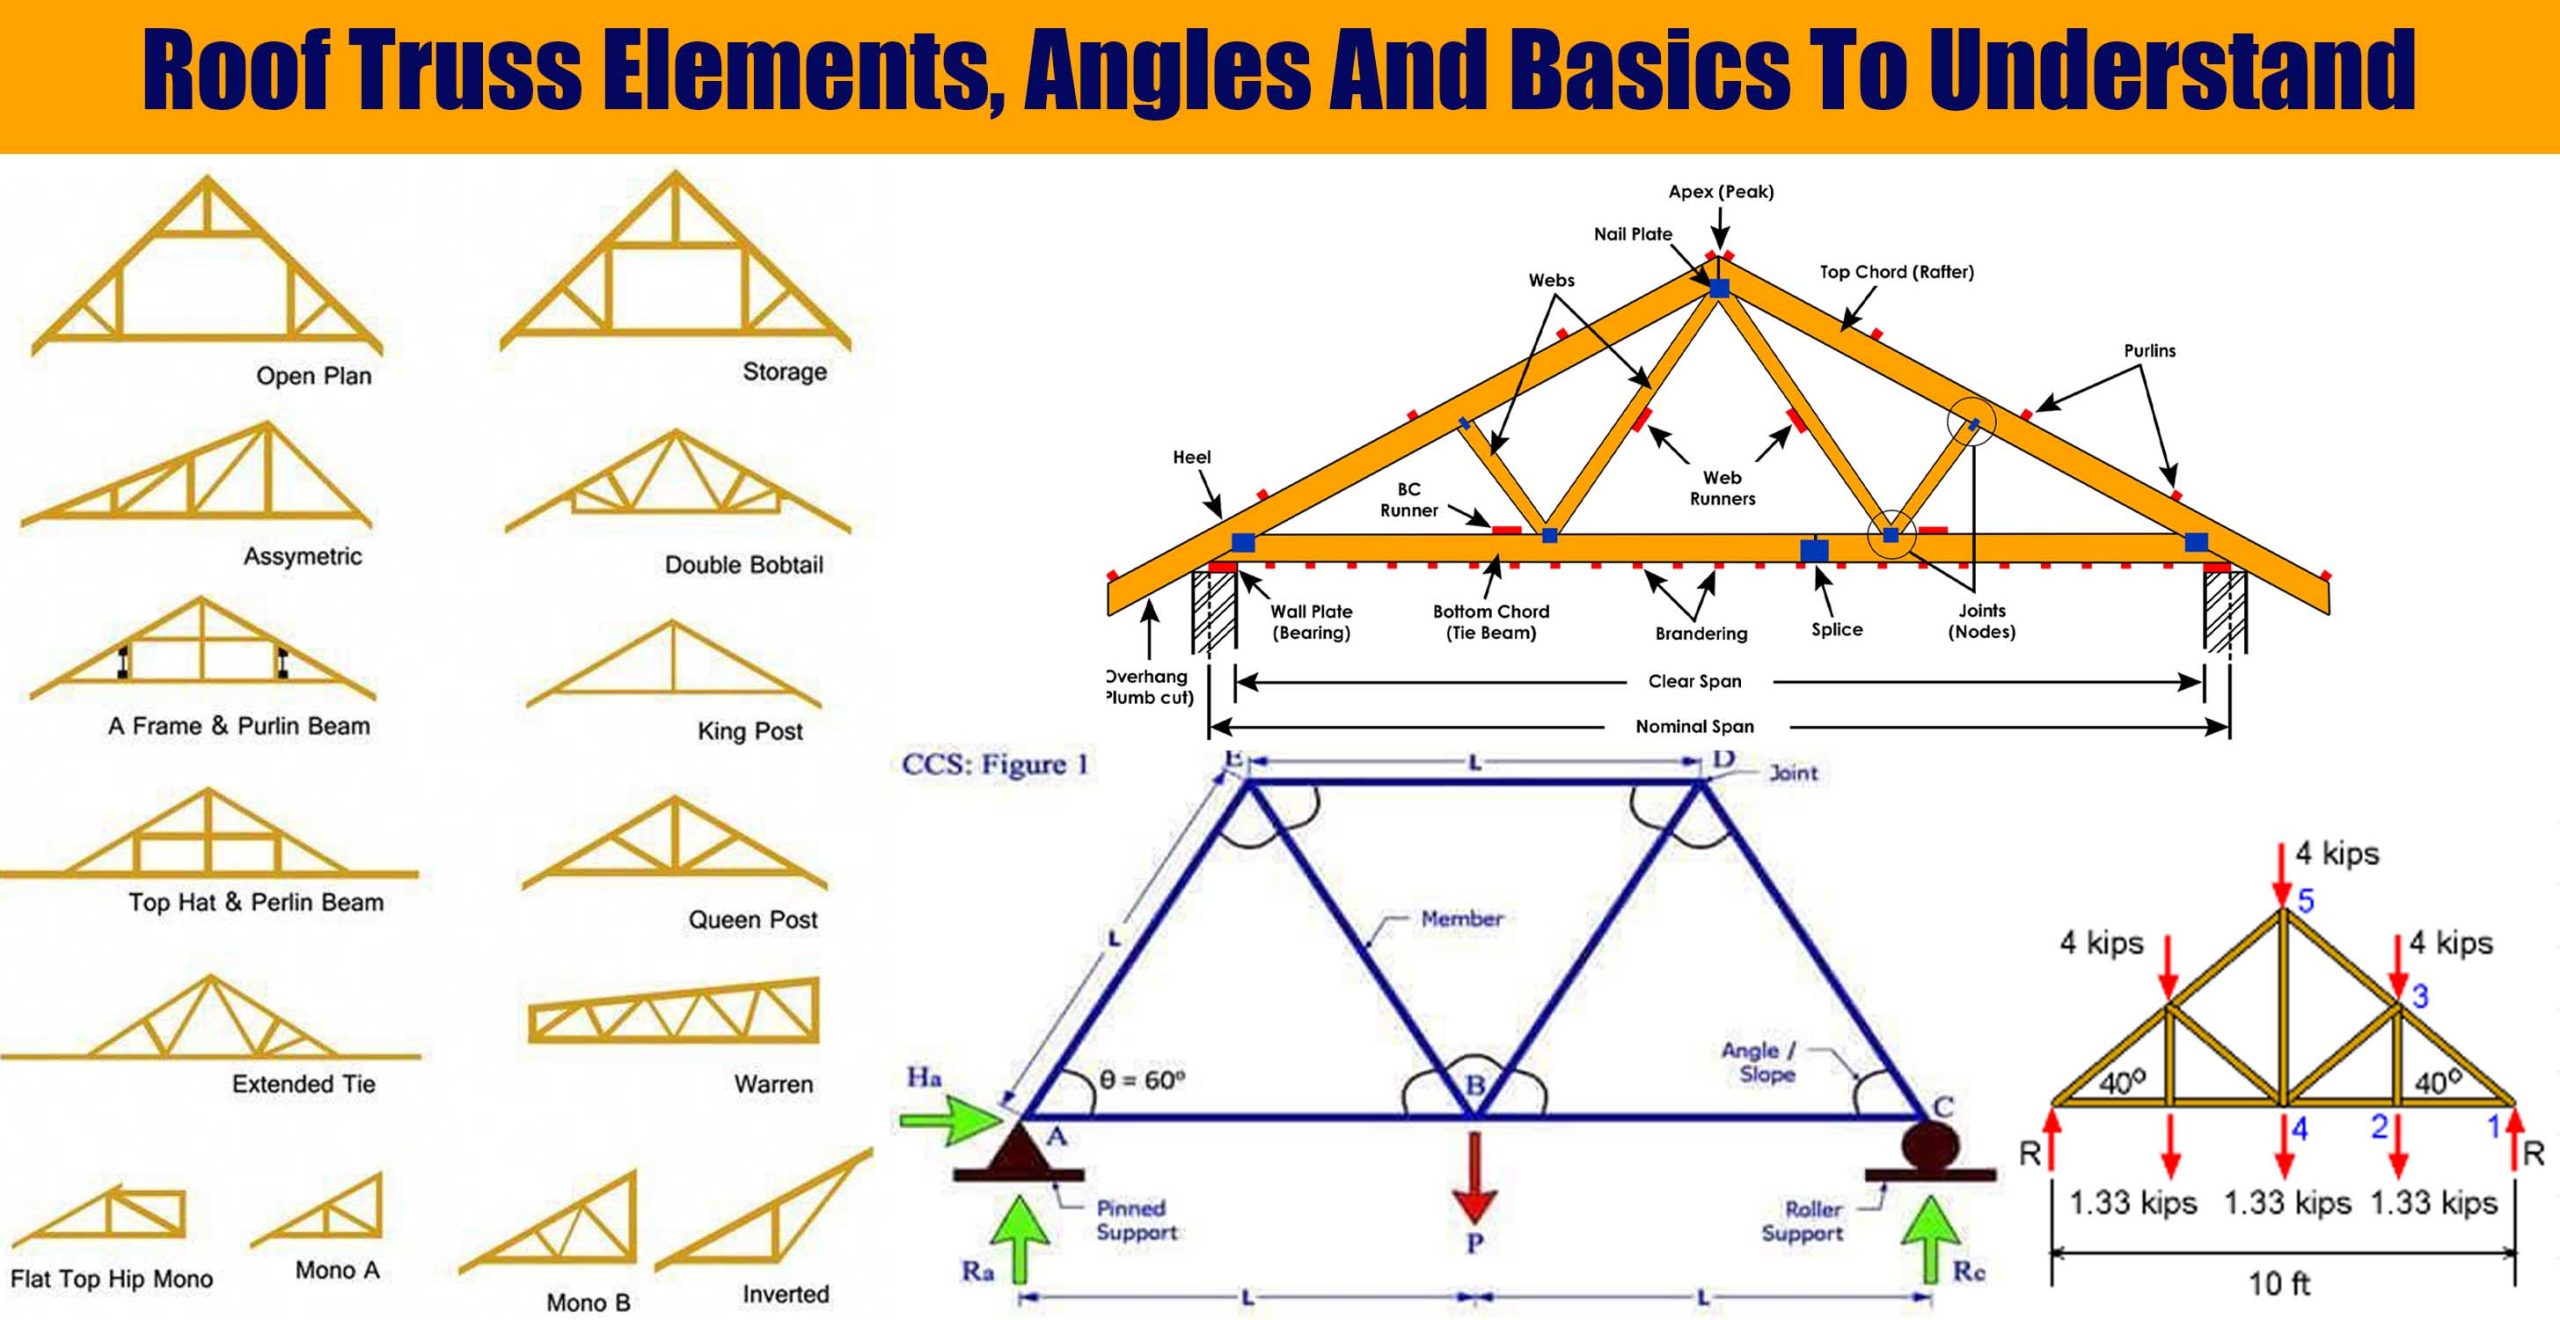 Roof Truss Elements, Angles And Basics To Understand